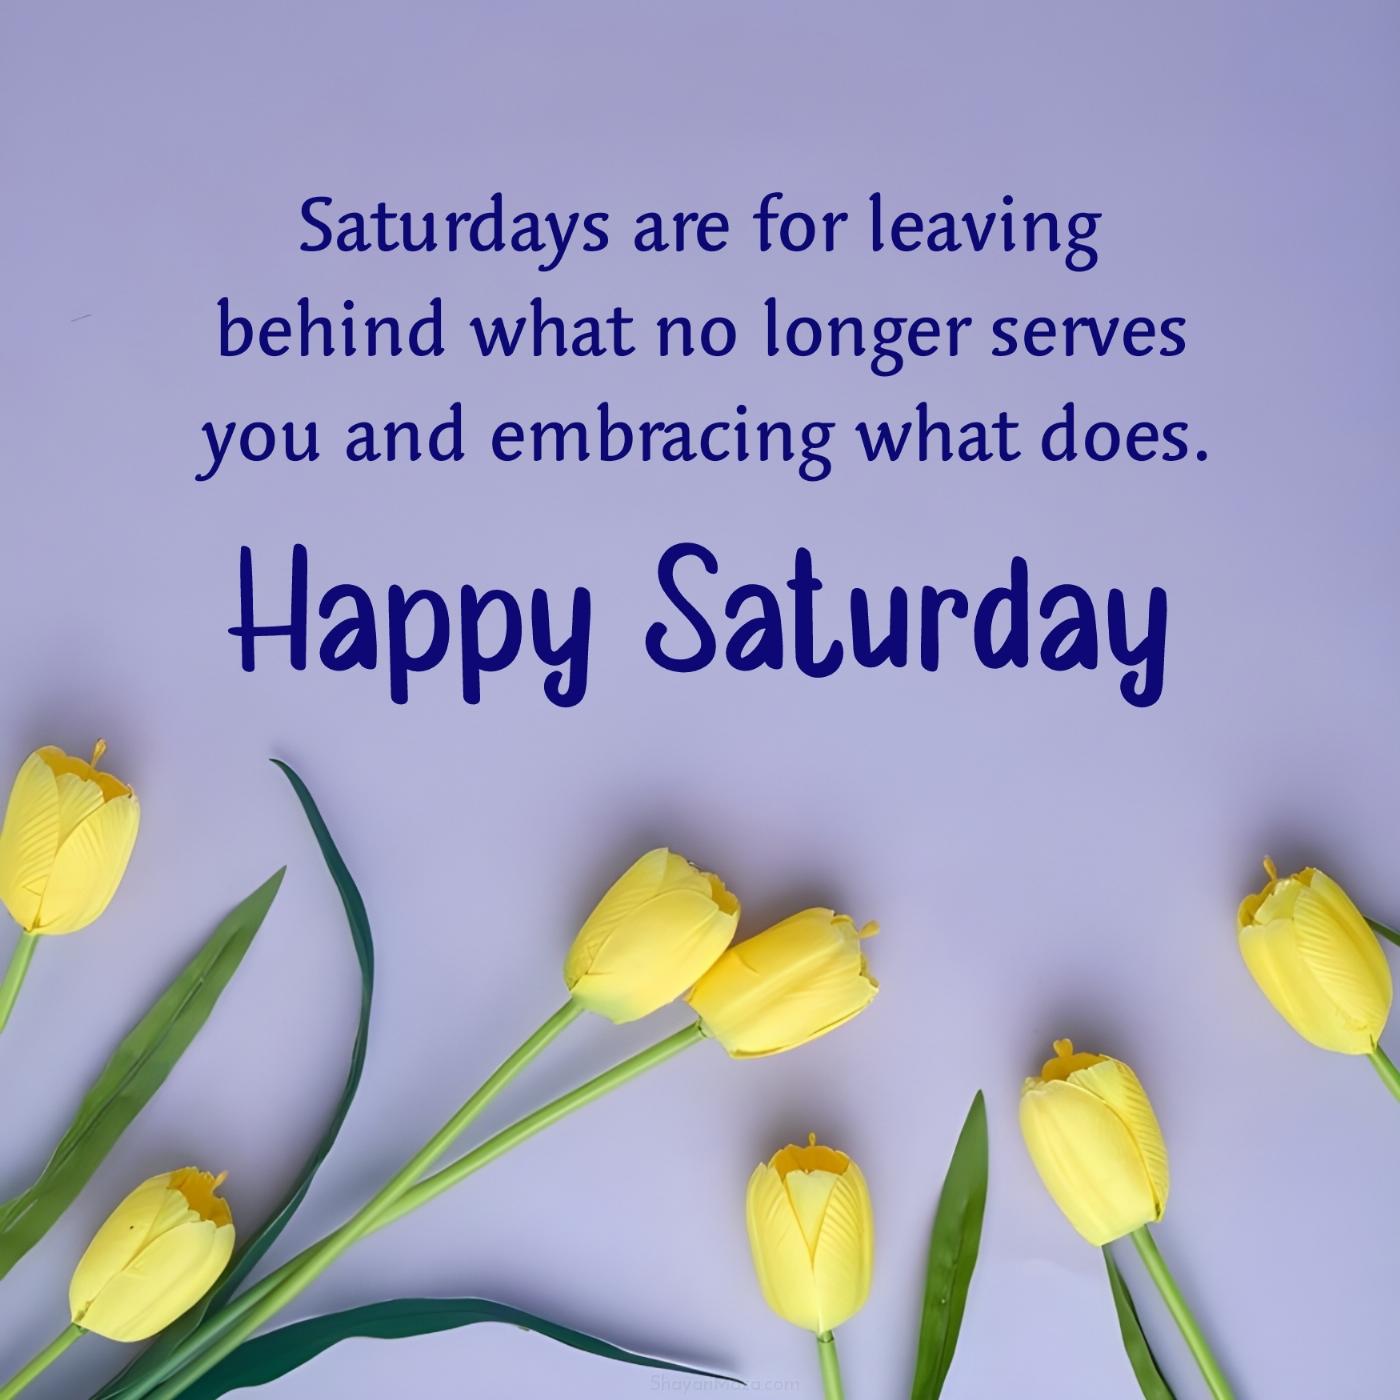 Saturdays are for leaving behind what no longer serves you